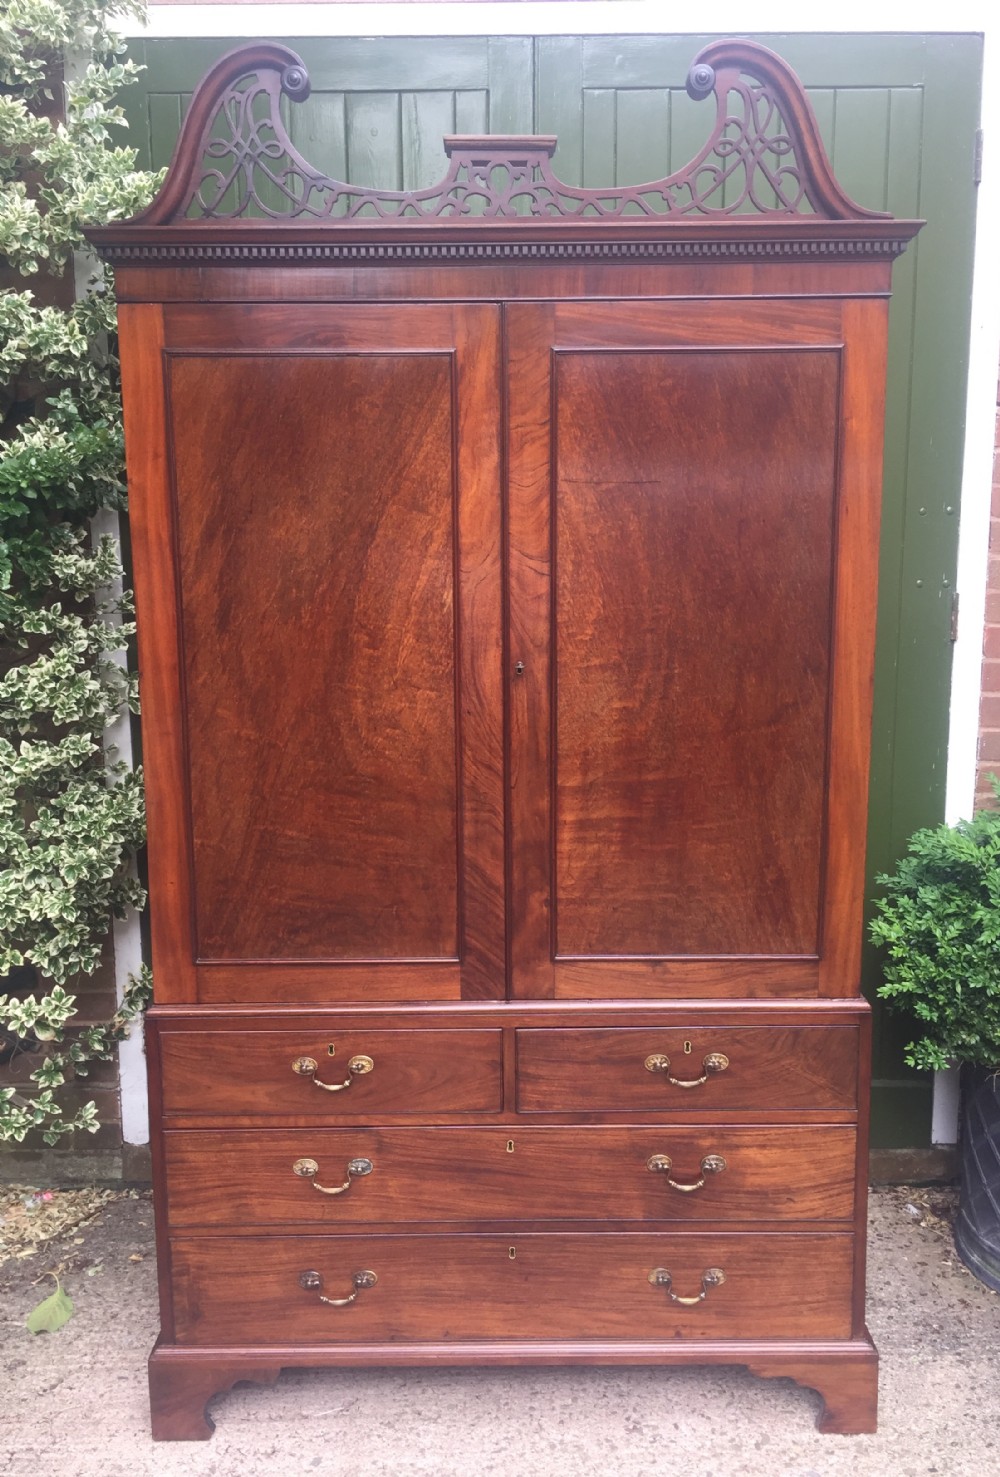 rare george iii chippendale period and design padouk and mahogany linenpress or wardrobe with open fretwork swanneck pediment cornice